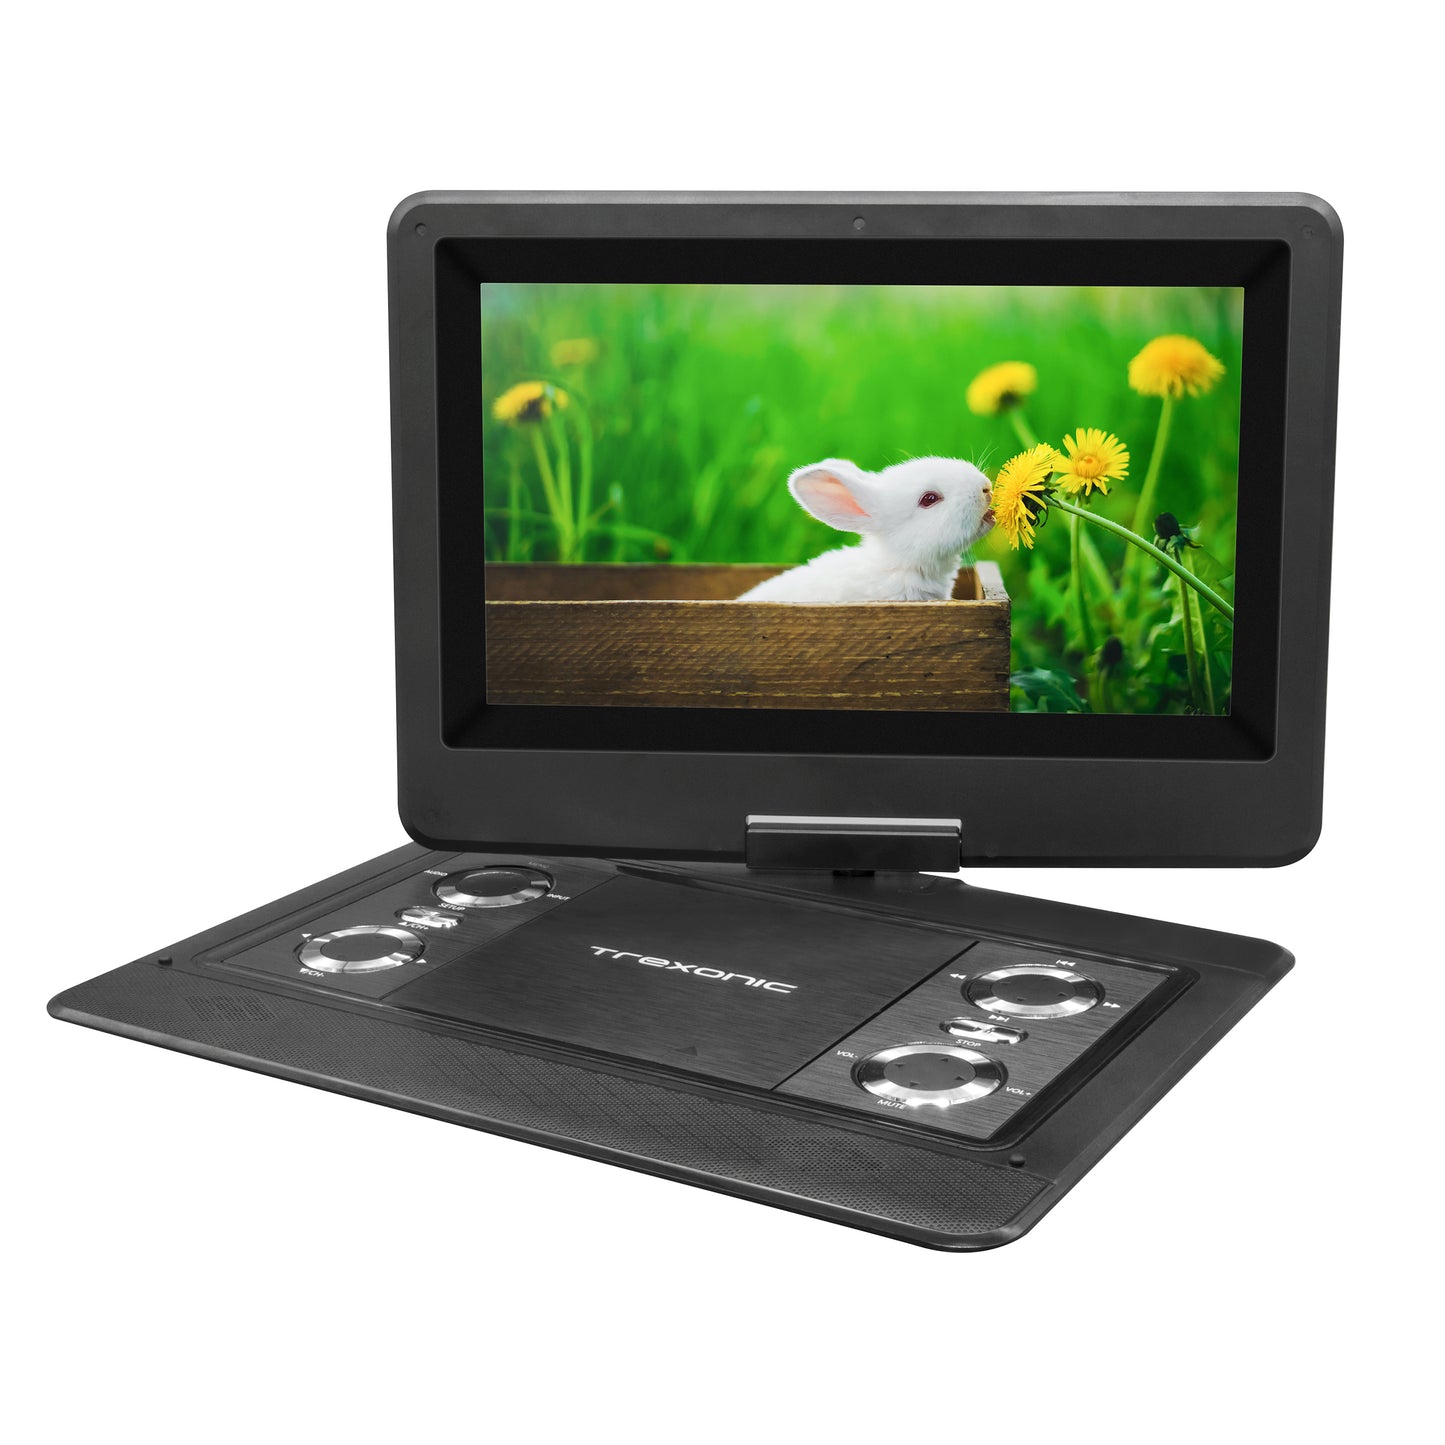 Trexonic Trexonic Portable TV+DVD Player with Color TFT LED Screen and USB/HD/AV Inputs